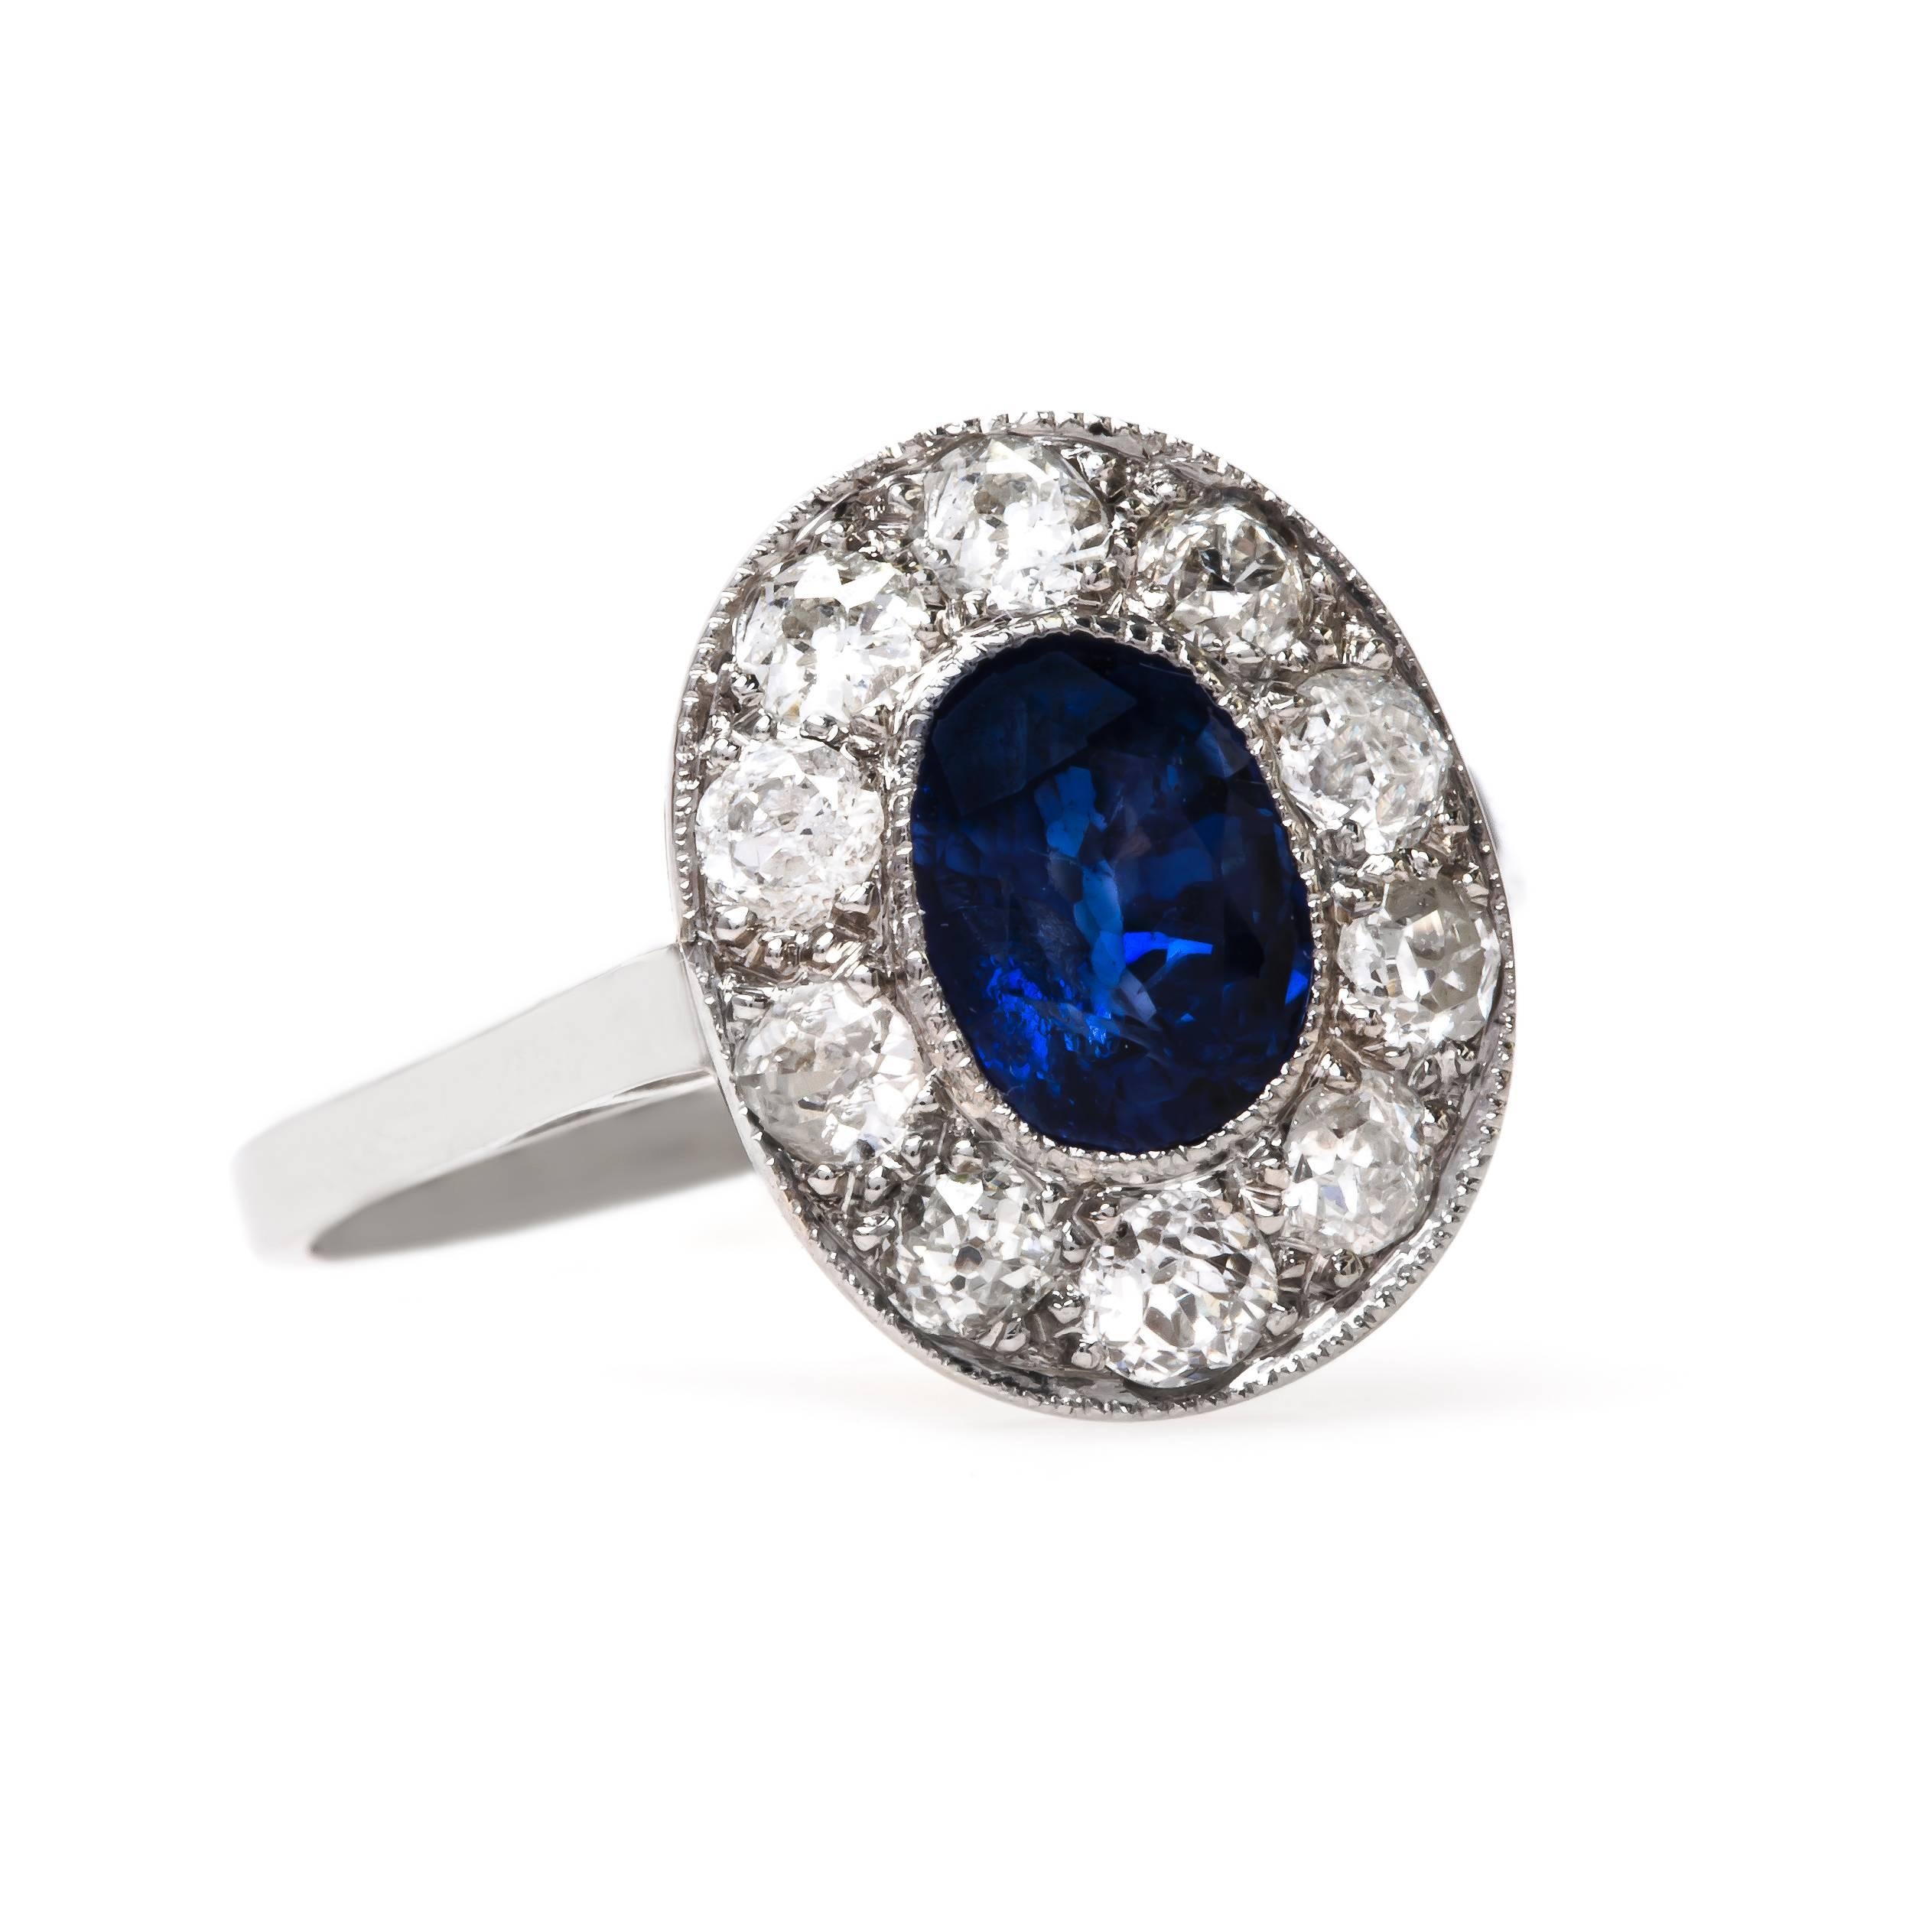 Milan is an alluring and authentic Art Deco (circa 1930) 18k and 14k white gold ring centering a brightly saturated Oval Cut sapphire. It is likely that Milan started its life as an earring! This bezel set beauty centers a beautiful sapphire gauged